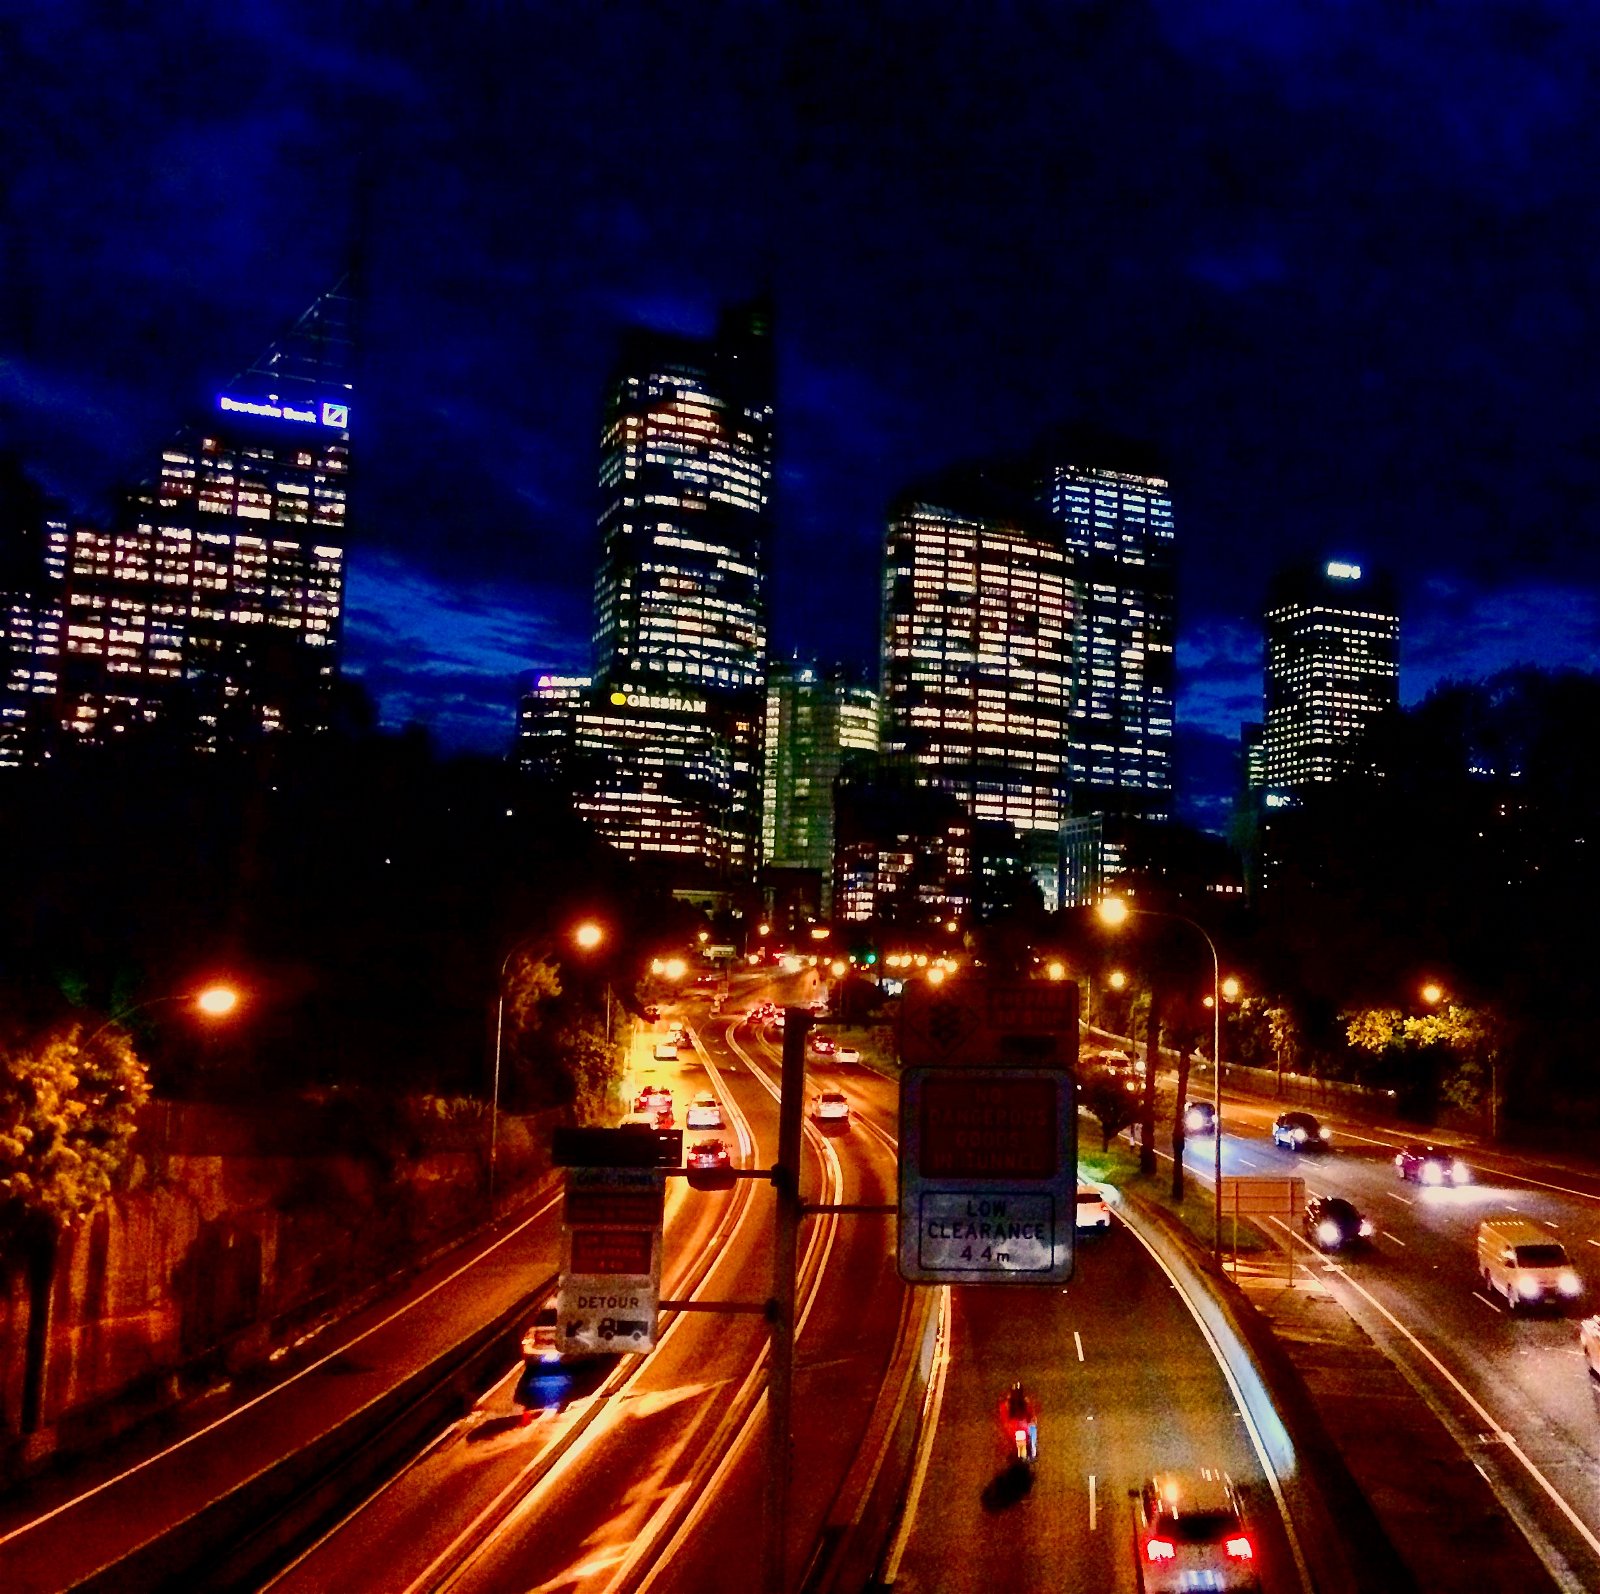 A night scene with three lanes of city traffic and lit streetlight an buildings in the background with a dark blue sky